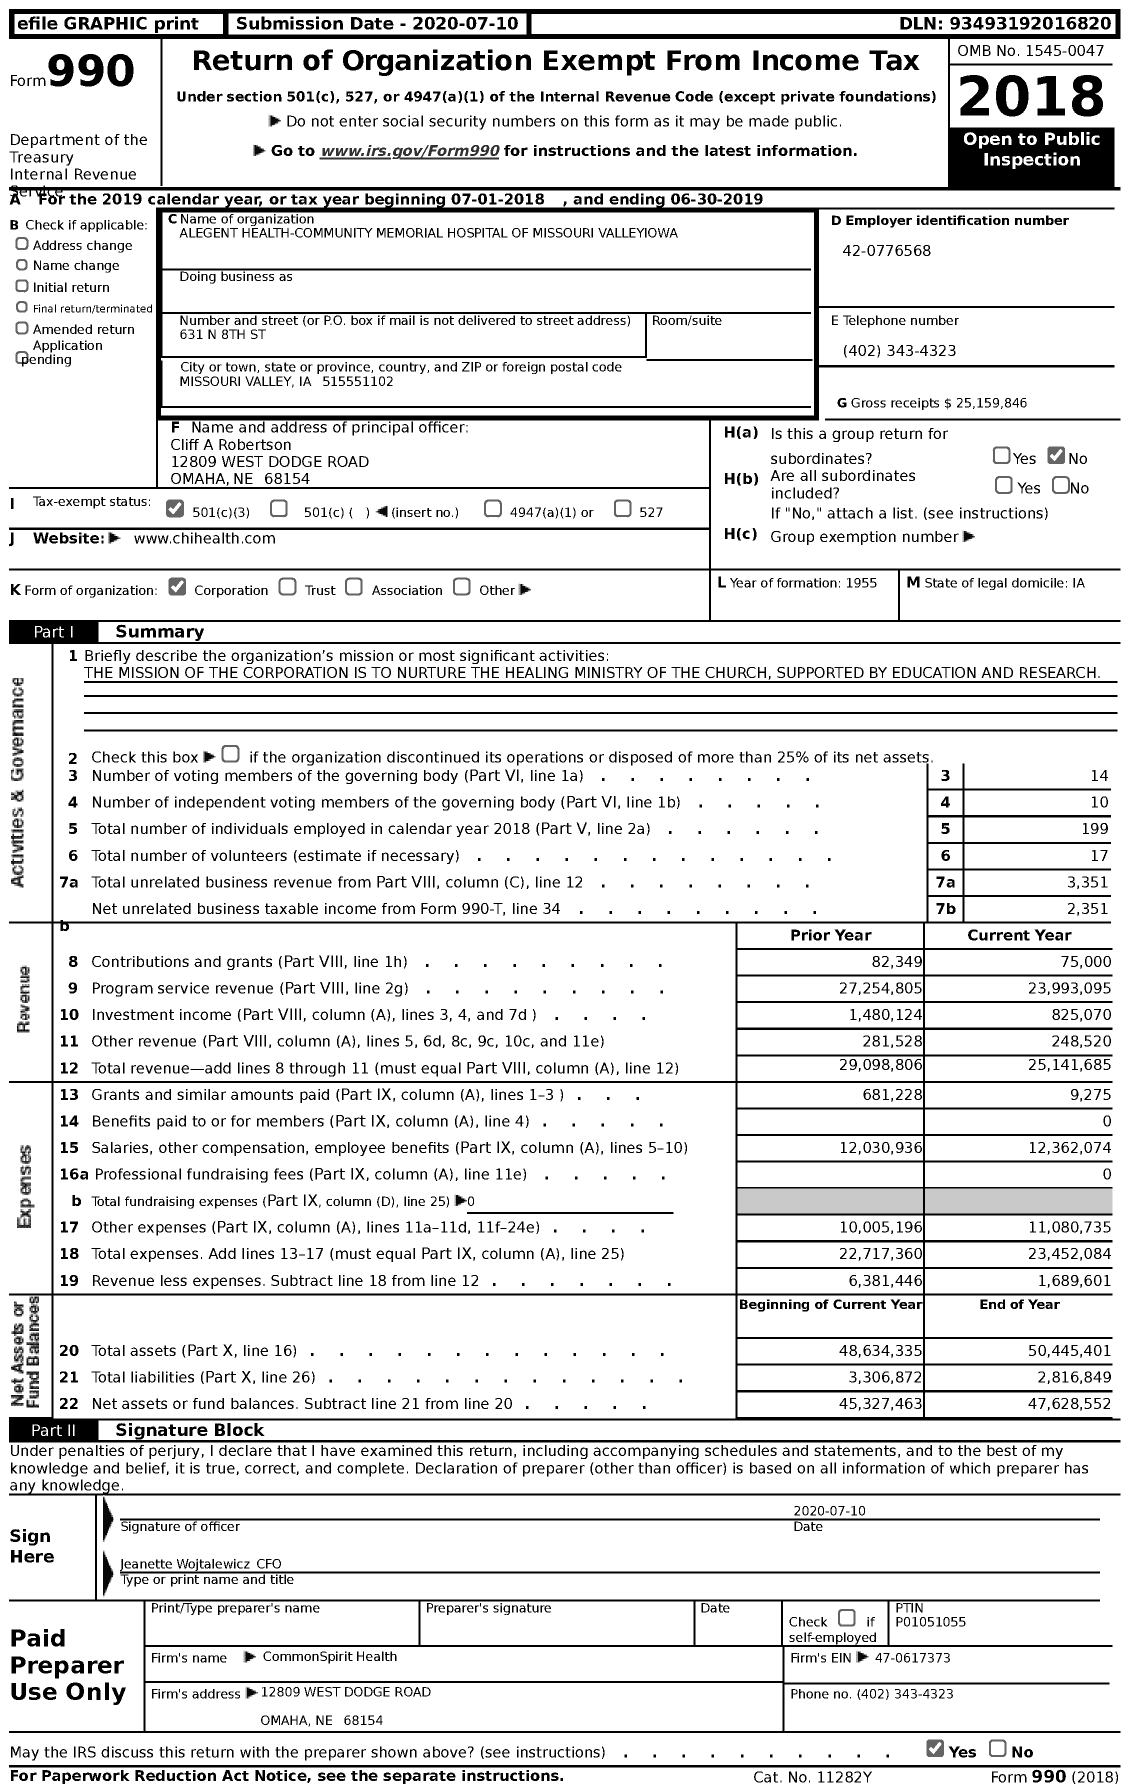 Image of first page of 2018 Form 990 for CHI Health Missouri Valley